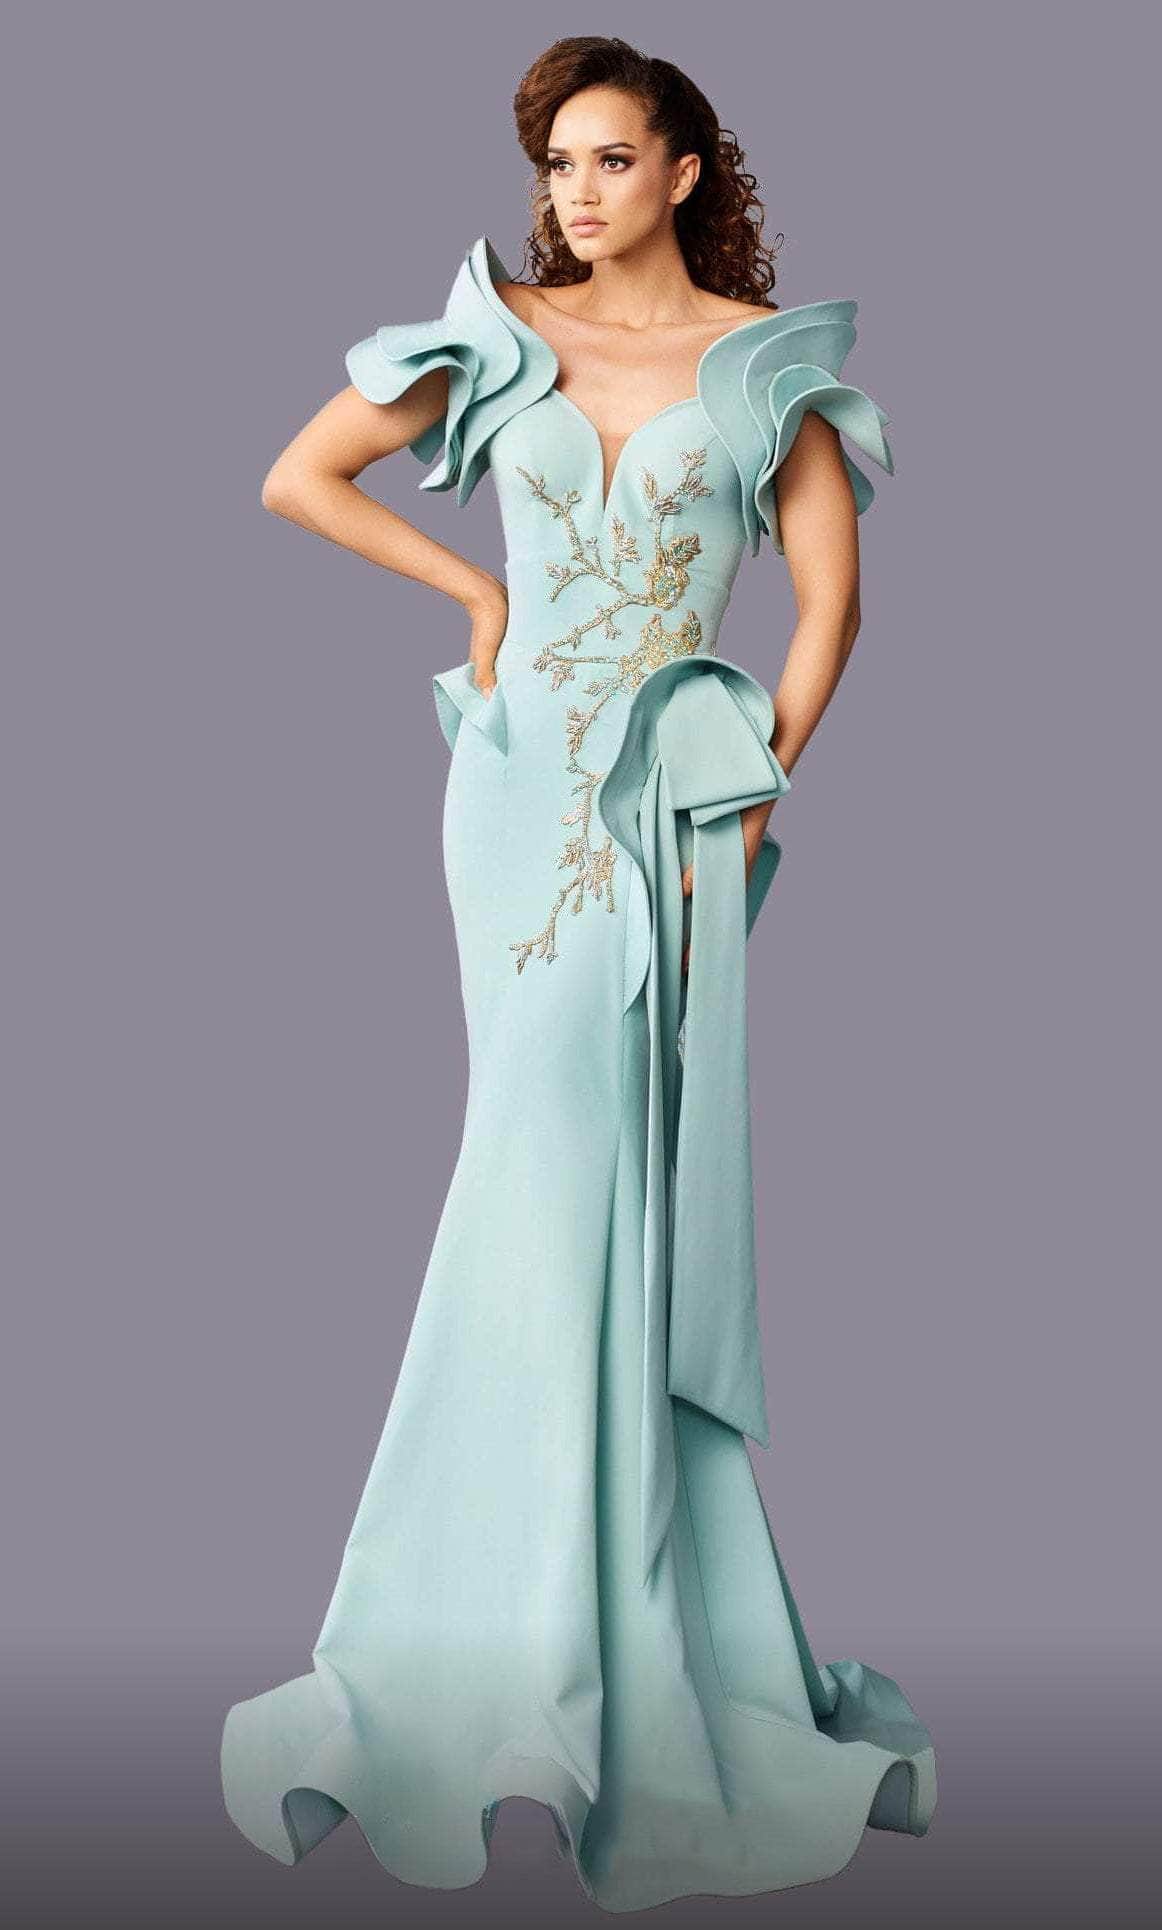 Image of MNM Couture 2670 - Peplum Mermaid Evening Gown